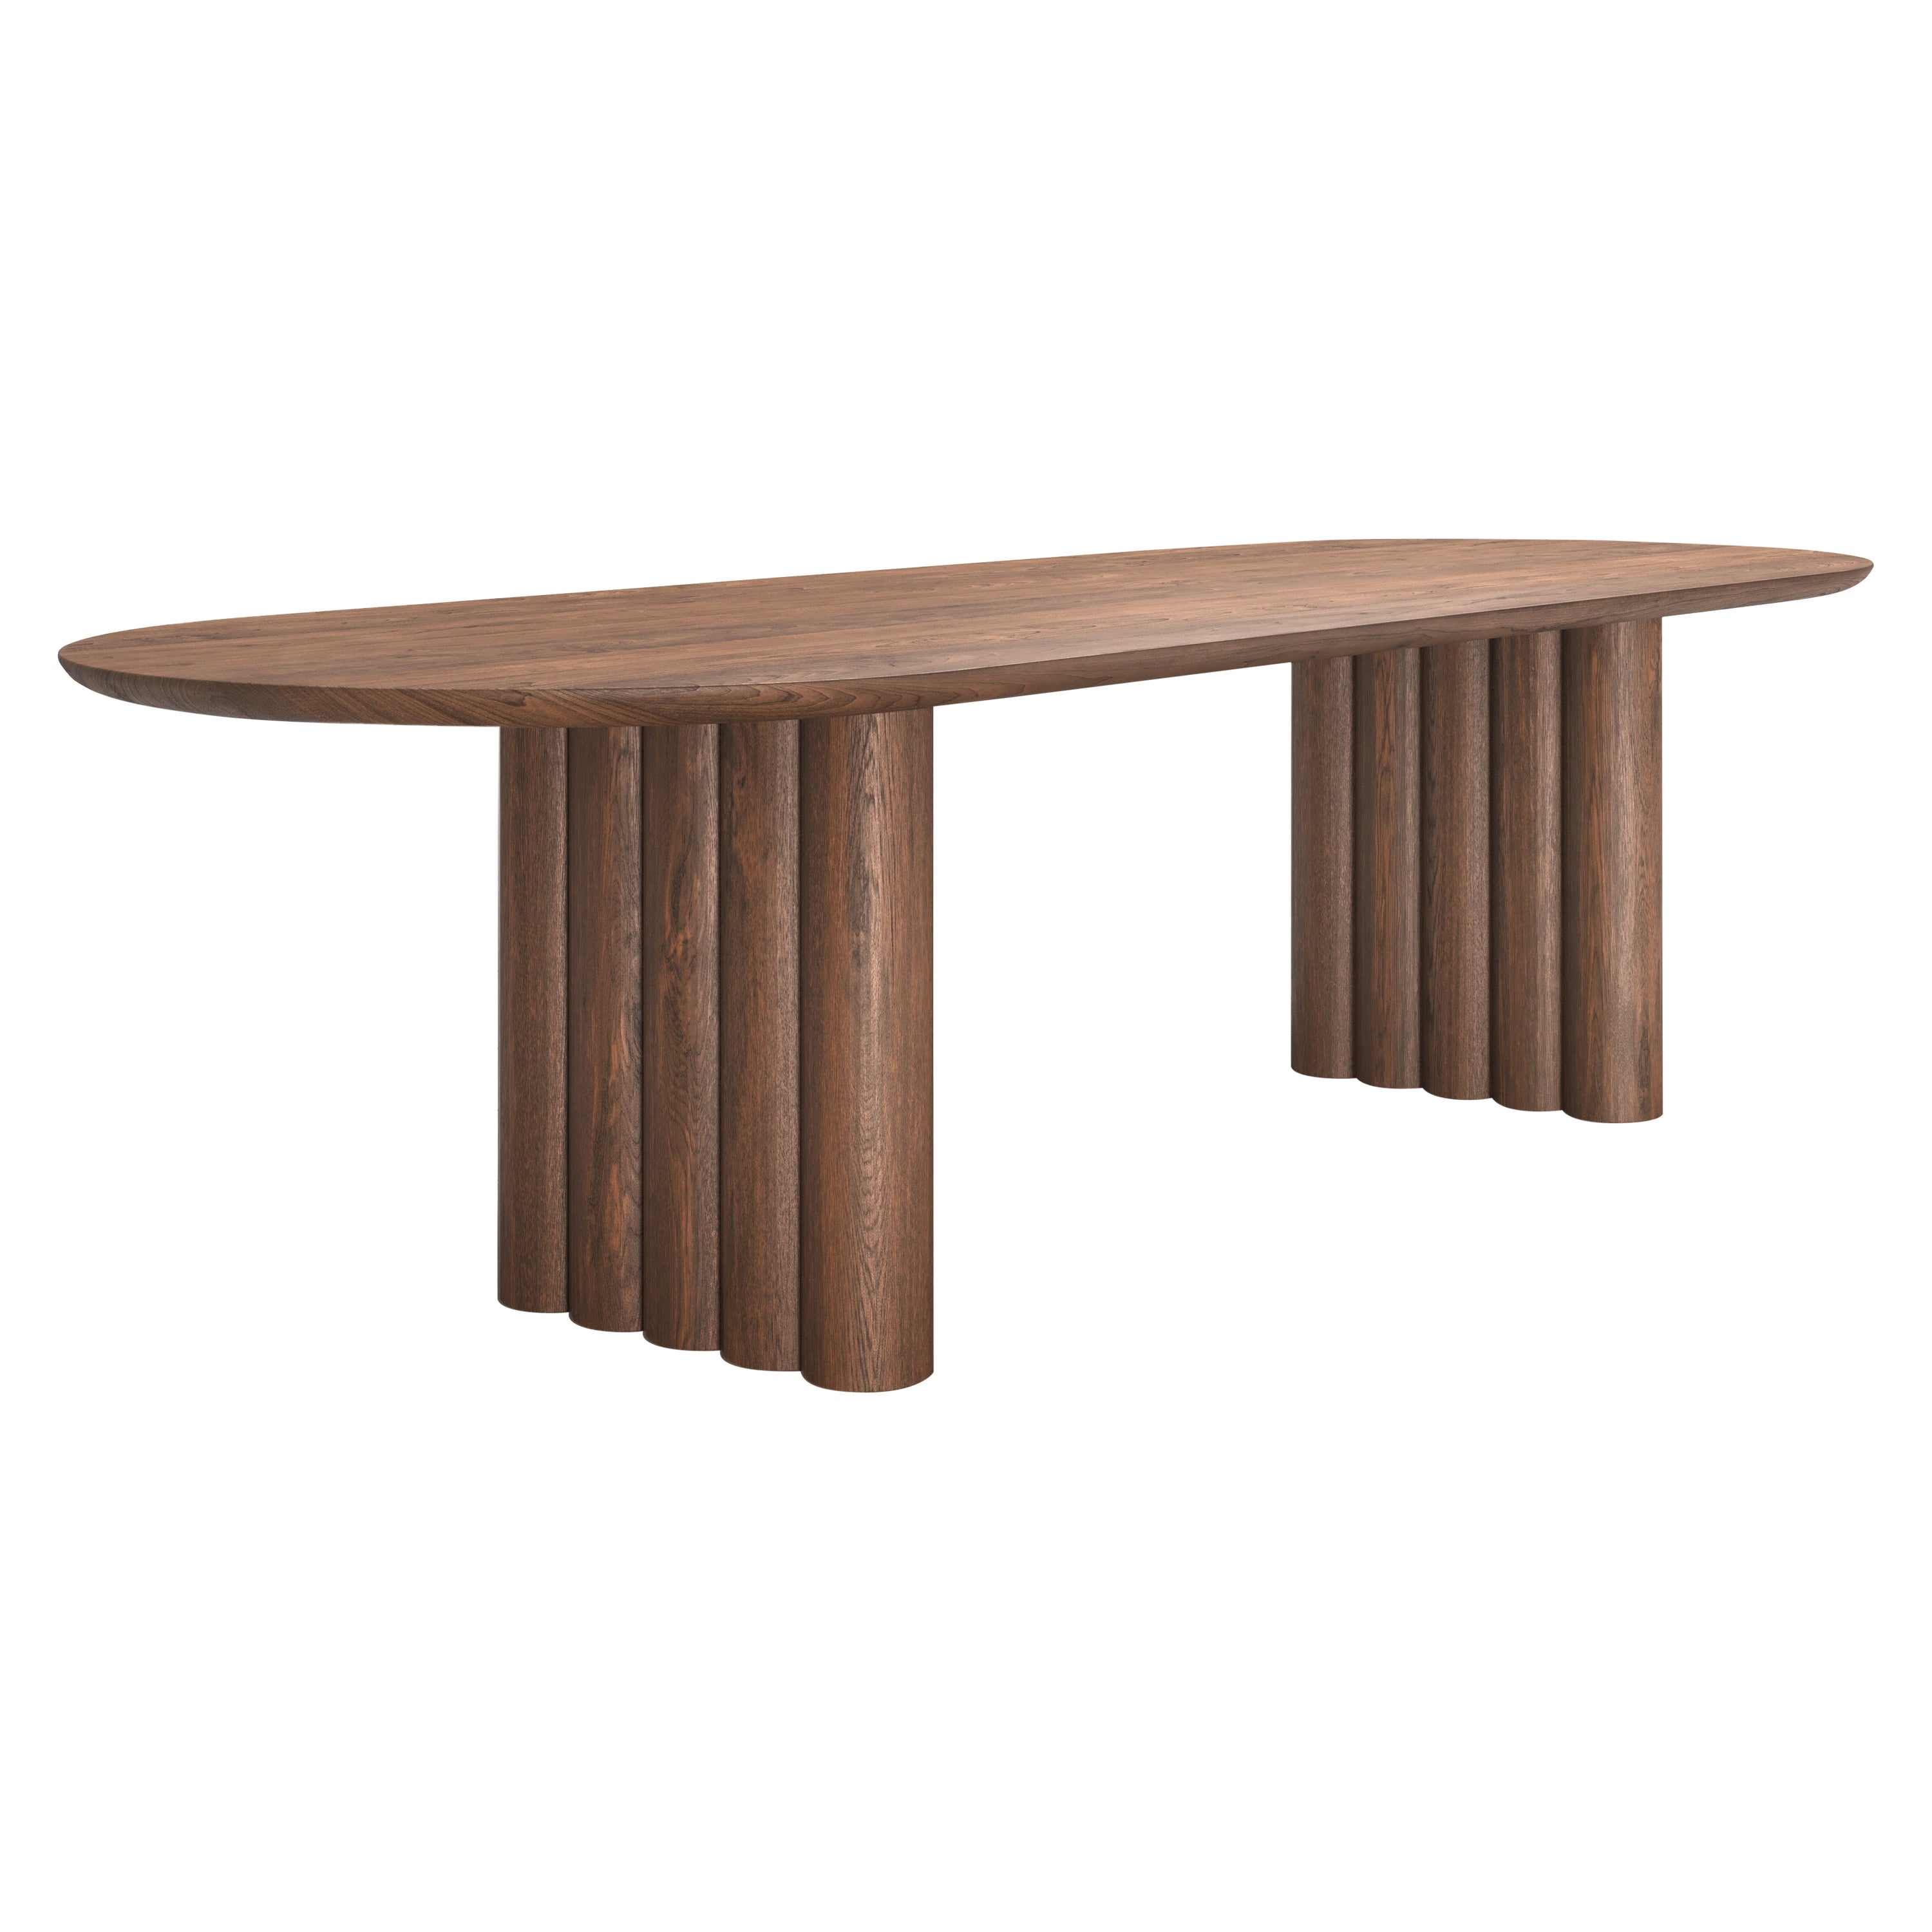 Contemporary Dining Table 'Plush' by Dk3, Smoked Oak or Walnut, 240 For Sale